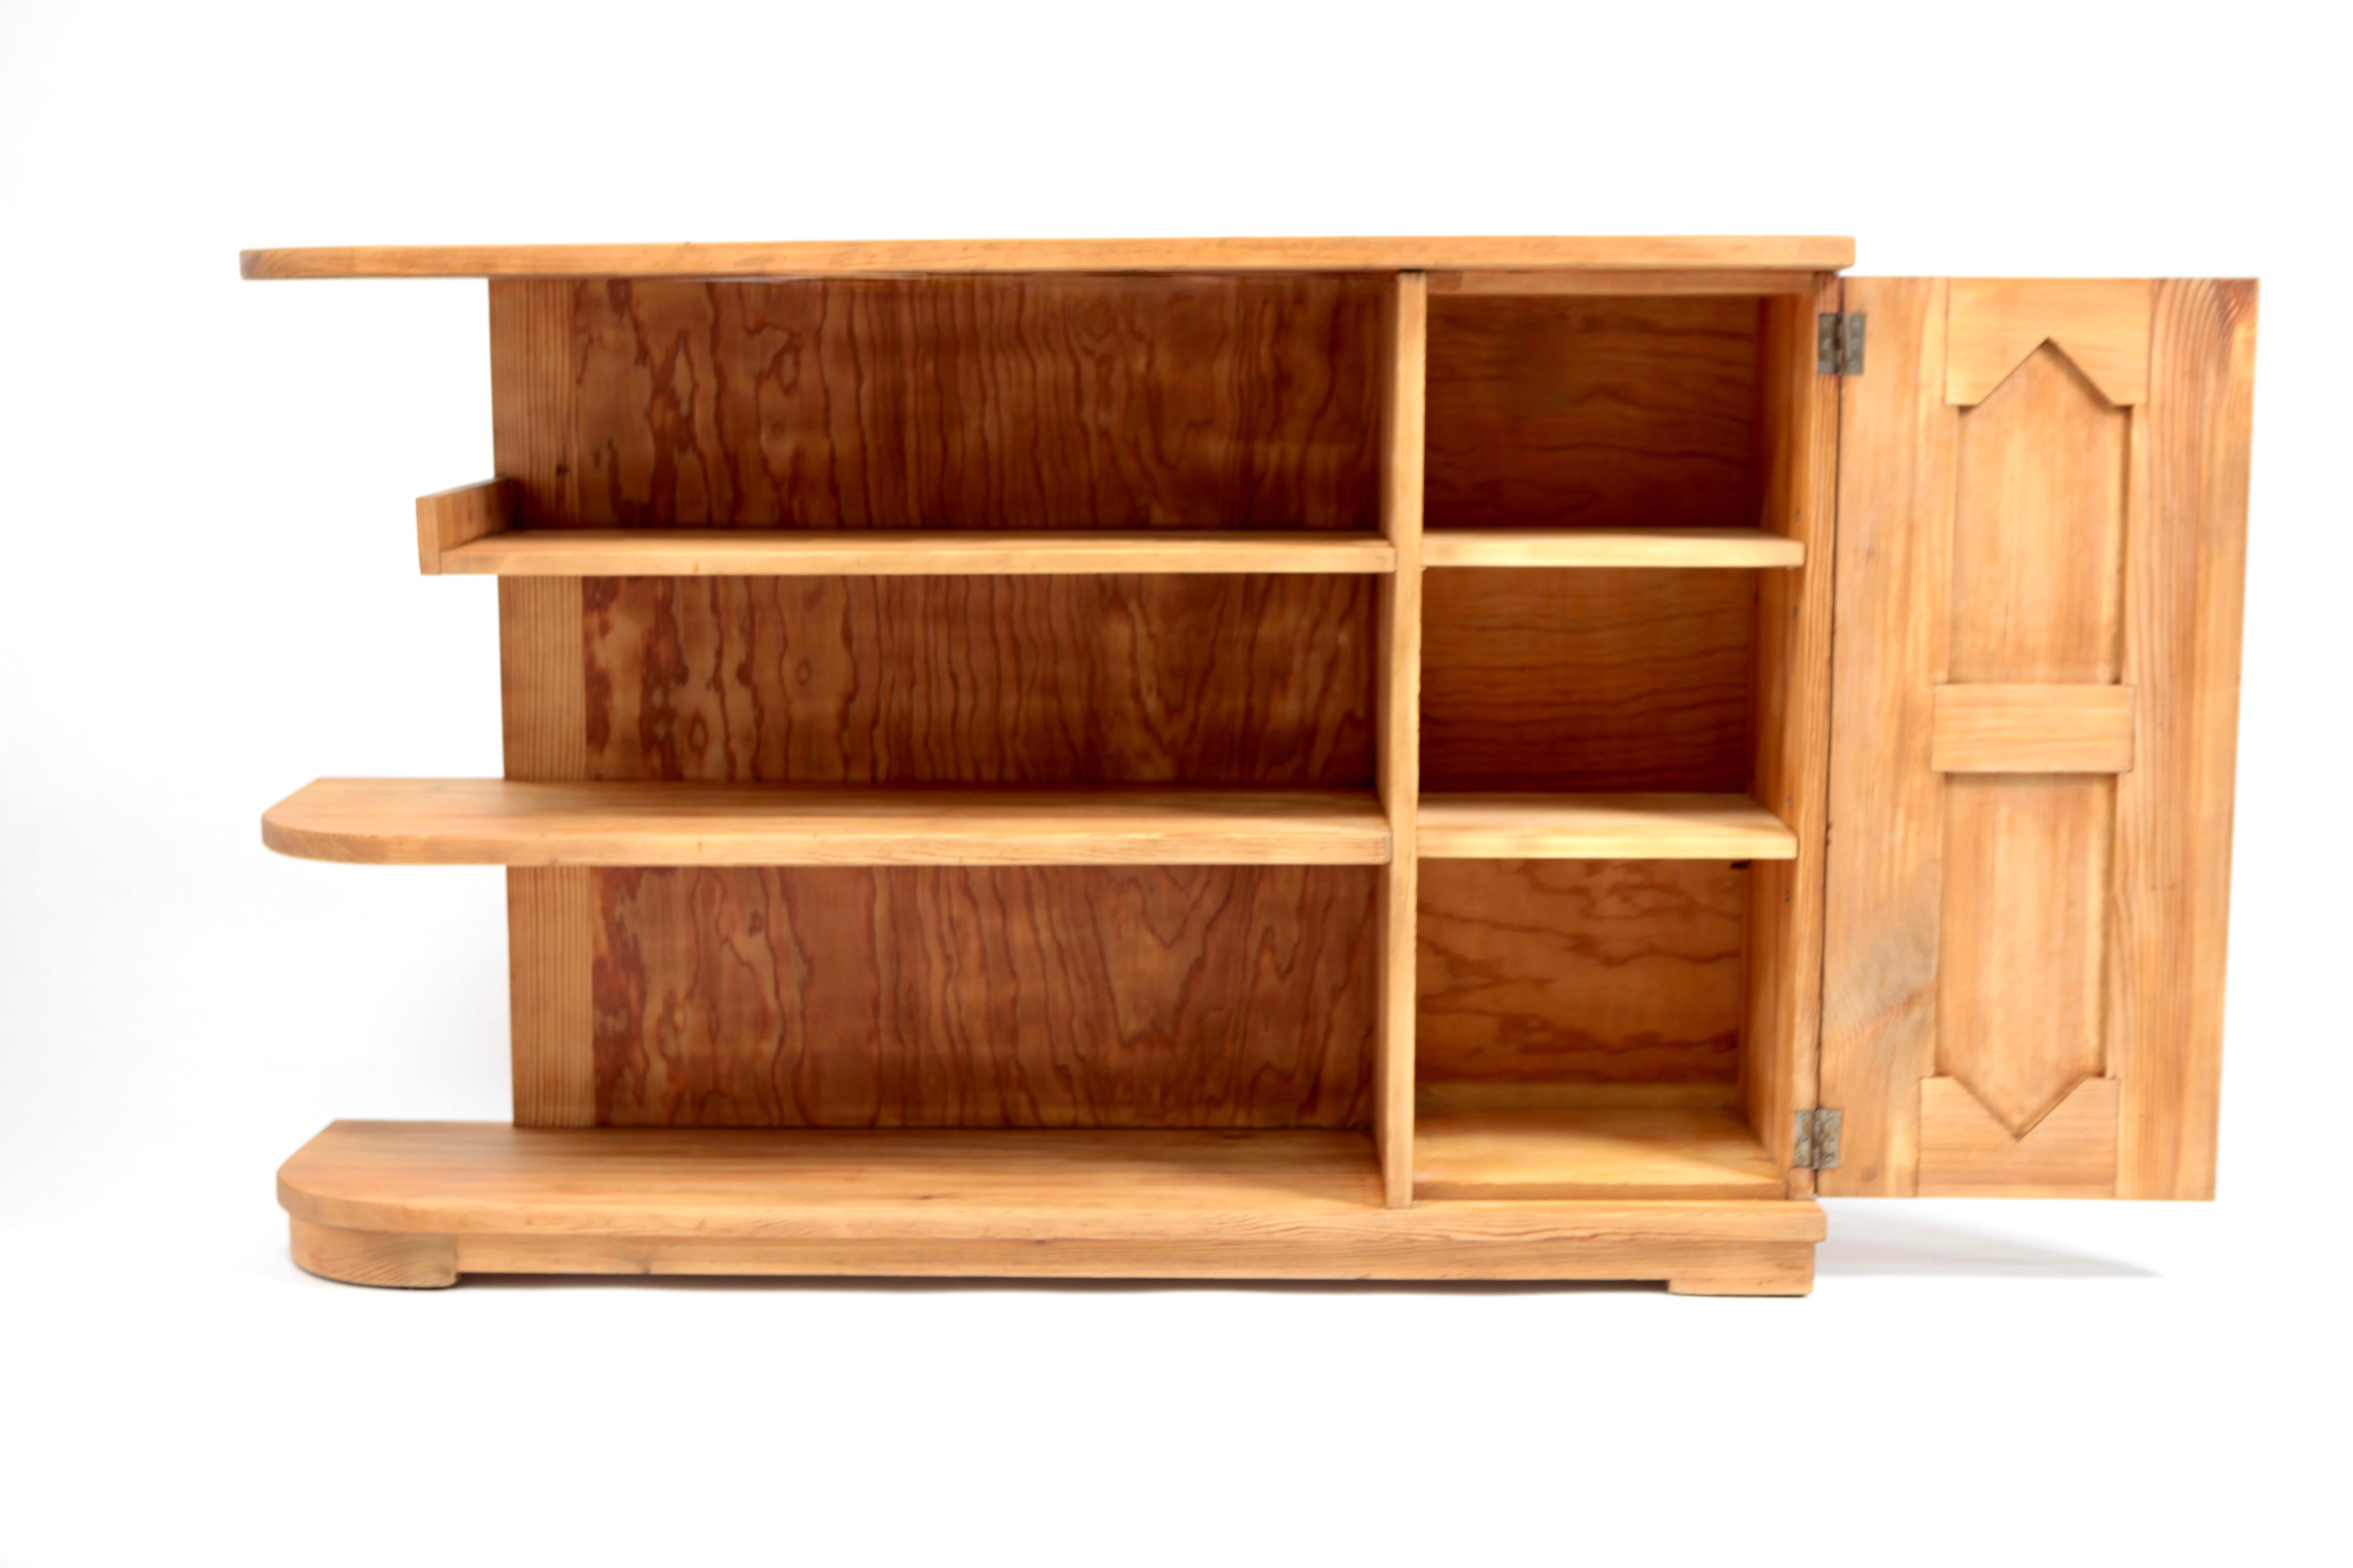 Axel Einar Hjorth, 'Lovö' Bookcase, Acid Stained Pine, Executed by NK in 1939 1